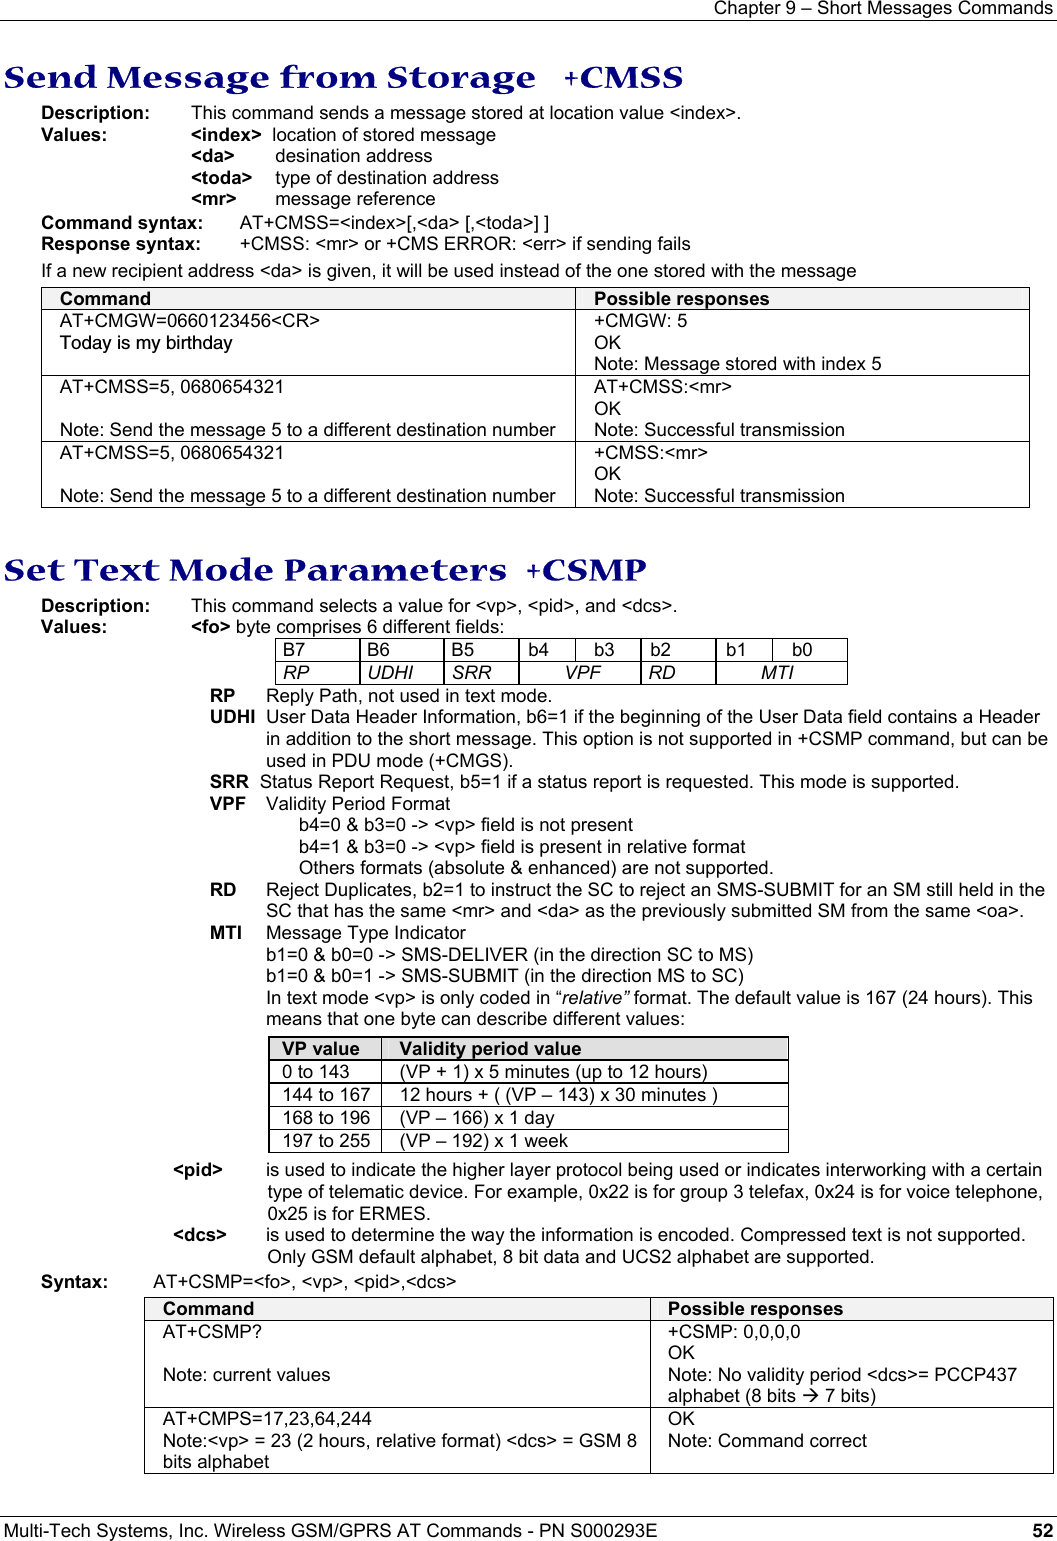 Chapter 9 – Short Messages Commands  Multi-Tech Systems, Inc. Wireless GSM/GPRS AT Commands - PN S000293E 52  Send Message from Storage   +CMSS Description:   This command sends a message stored at location value &lt;index&gt;.   Values: &lt;index&gt;  location of stored message  &lt;da&gt; desination address   &lt;toda&gt; type of destination address  &lt;mr&gt; message reference Command syntax:   AT+CMSS=&lt;index&gt;[,&lt;da&gt; [,&lt;toda&gt;] ] Response syntax:    +CMSS: &lt;mr&gt; or +CMS ERROR: &lt;err&gt; if sending fails If a new recipient address &lt;da&gt; is given, it will be used instead of the one stored with the message Command  Possible responses AT+CMGW=0660123456&lt;CR&gt; Today is my birthday  +CMGW: 5 OK Note: Message stored with index 5  AT+CMSS=5, 0680654321  Note: Send the message 5 to a different destination number AT+CMSS:&lt;mr&gt; OK Note: Successful transmission AT+CMSS=5, 0680654321  Note: Send the message 5 to a different destination number +CMSS:&lt;mr&gt; OK Note: Successful transmission  Set Text Mode Parameters  +CSMP Description:  This command selects a value for &lt;vp&gt;, &lt;pid&gt;, and &lt;dcs&gt;.   Values:   &lt;fo&gt; byte comprises 6 different fields: B7 B6 B5 b4 b3 b2 b1 b0 RP UDHI SRR  VPF RD  MTI RP   Reply Path, not used in text mode.  UDHI  User Data Header Information, b6=1 if the beginning of the User Data field contains a Header in addition to the short message. This option is not supported in +CSMP command, but can be used in PDU mode (+CMGS). SRR  Status Report Request, b5=1 if a status report is requested. This mode is supported. VPF   Validity Period Format     b4=0 &amp; b3=0 -&gt; &lt;vp&gt; field is not present      b4=1 &amp; b3=0 -&gt; &lt;vp&gt; field is present in relative format     Others formats (absolute &amp; enhanced) are not supported. RD   Reject Duplicates, b2=1 to instruct the SC to reject an SMS-SUBMIT for an SM still held in the SC that has the same &lt;mr&gt; and &lt;da&gt; as the previously submitted SM from the same &lt;oa&gt;. MTI   Message Type Indicator b1=0 &amp; b0=0 -&gt; SMS-DELIVER (in the direction SC to MS) b1=0 &amp; b0=1 -&gt; SMS-SUBMIT (in the direction MS to SC) In text mode &lt;vp&gt; is only coded in “relative” format. The default value is 167 (24 hours). This means that one byte can describe different values: VP value  Validity period value 0 to 143  (VP + 1) x 5 minutes (up to 12 hours) 144 to 167  12 hours + ( (VP – 143) x 30 minutes ) 168 to 196  (VP – 166) x 1 day 197 to 255  (VP – 192) x 1 week &lt;pid&gt;   is used to indicate the higher layer protocol being used or indicates interworking with a certain type of telematic device. For example, 0x22 is for group 3 telefax, 0x24 is for voice telephone, 0x25 is for ERMES. &lt;dcs&gt;   is used to determine the way the information is encoded. Compressed text is not supported. Only GSM default alphabet, 8 bit data and UCS2 alphabet are supported. Syntax:    AT+CSMP=&lt;fo&gt;, &lt;vp&gt;, &lt;pid&gt;,&lt;dcs&gt; Command  Possible responses AT+CSMP?  Note: current values +CSMP: 0,0,0,0 OK Note: No validity period &lt;dcs&gt;= PCCP437 alphabet (8 bits Æ 7 bits) AT+CMPS=17,23,64,244 Note:&lt;vp&gt; = 23 (2 hours, relative format) &lt;dcs&gt; = GSM 8 bits alphabet  OK Note: Command correct   